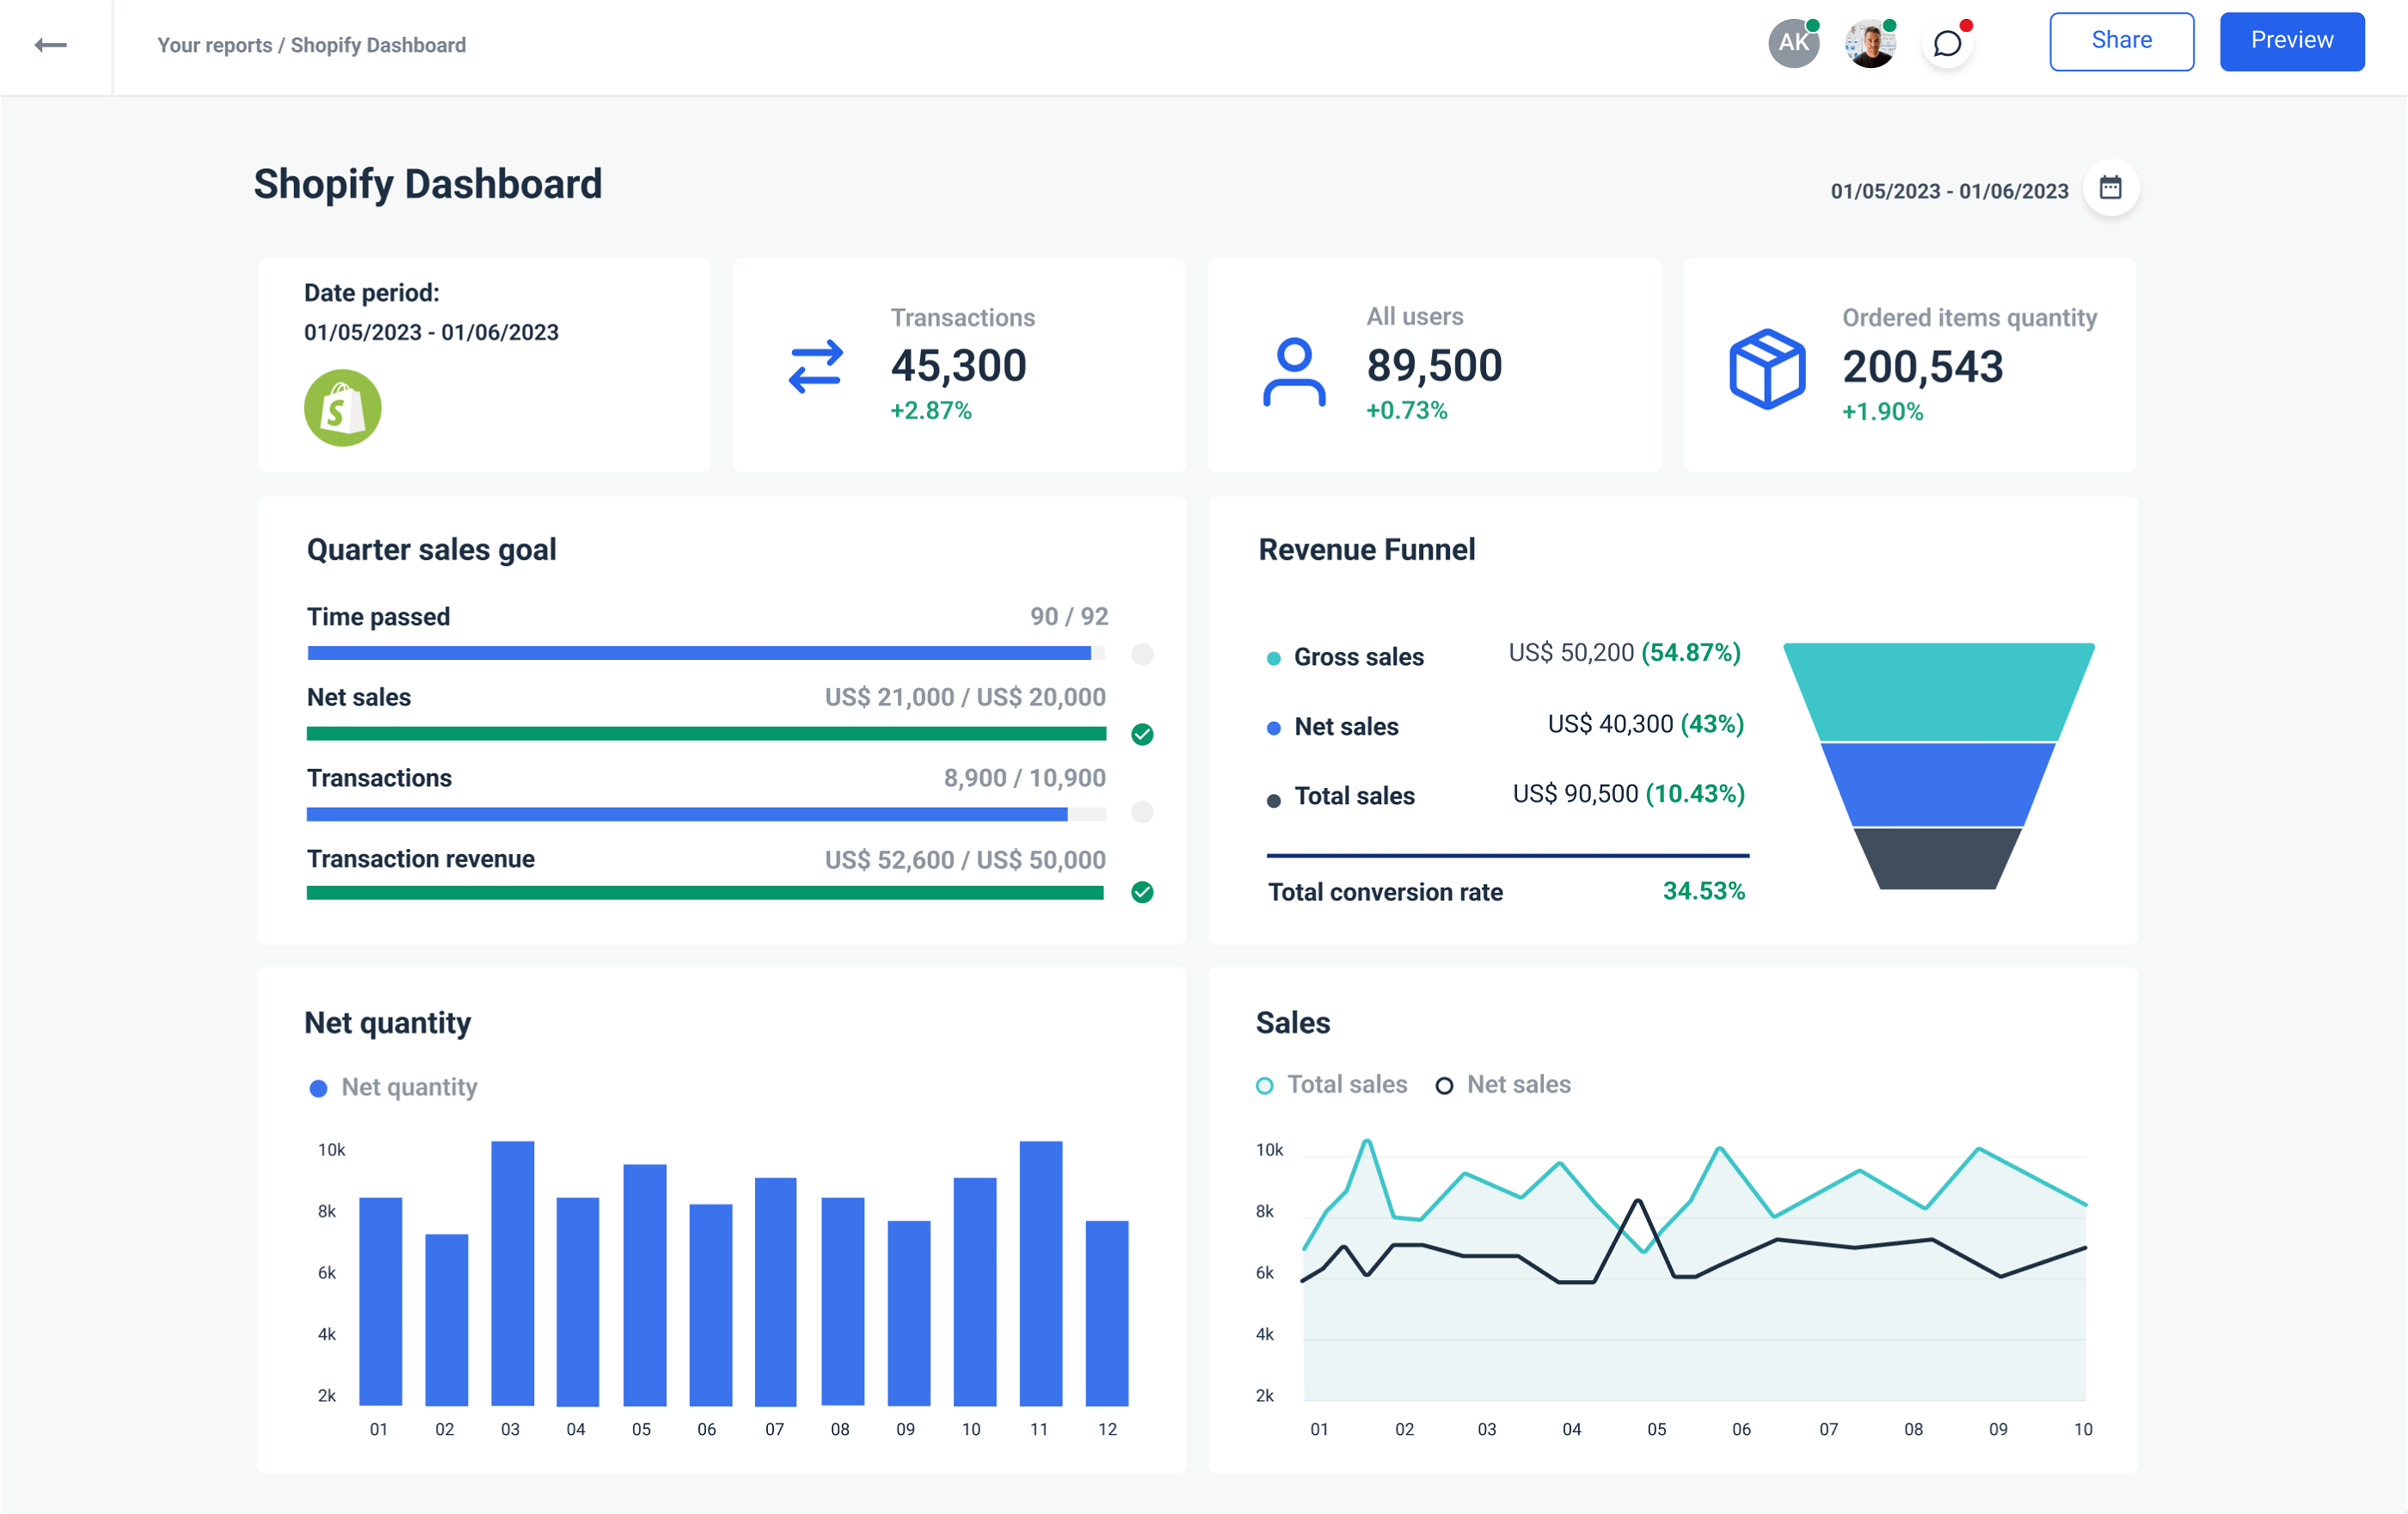 Shopify dashboard from Whatagraph